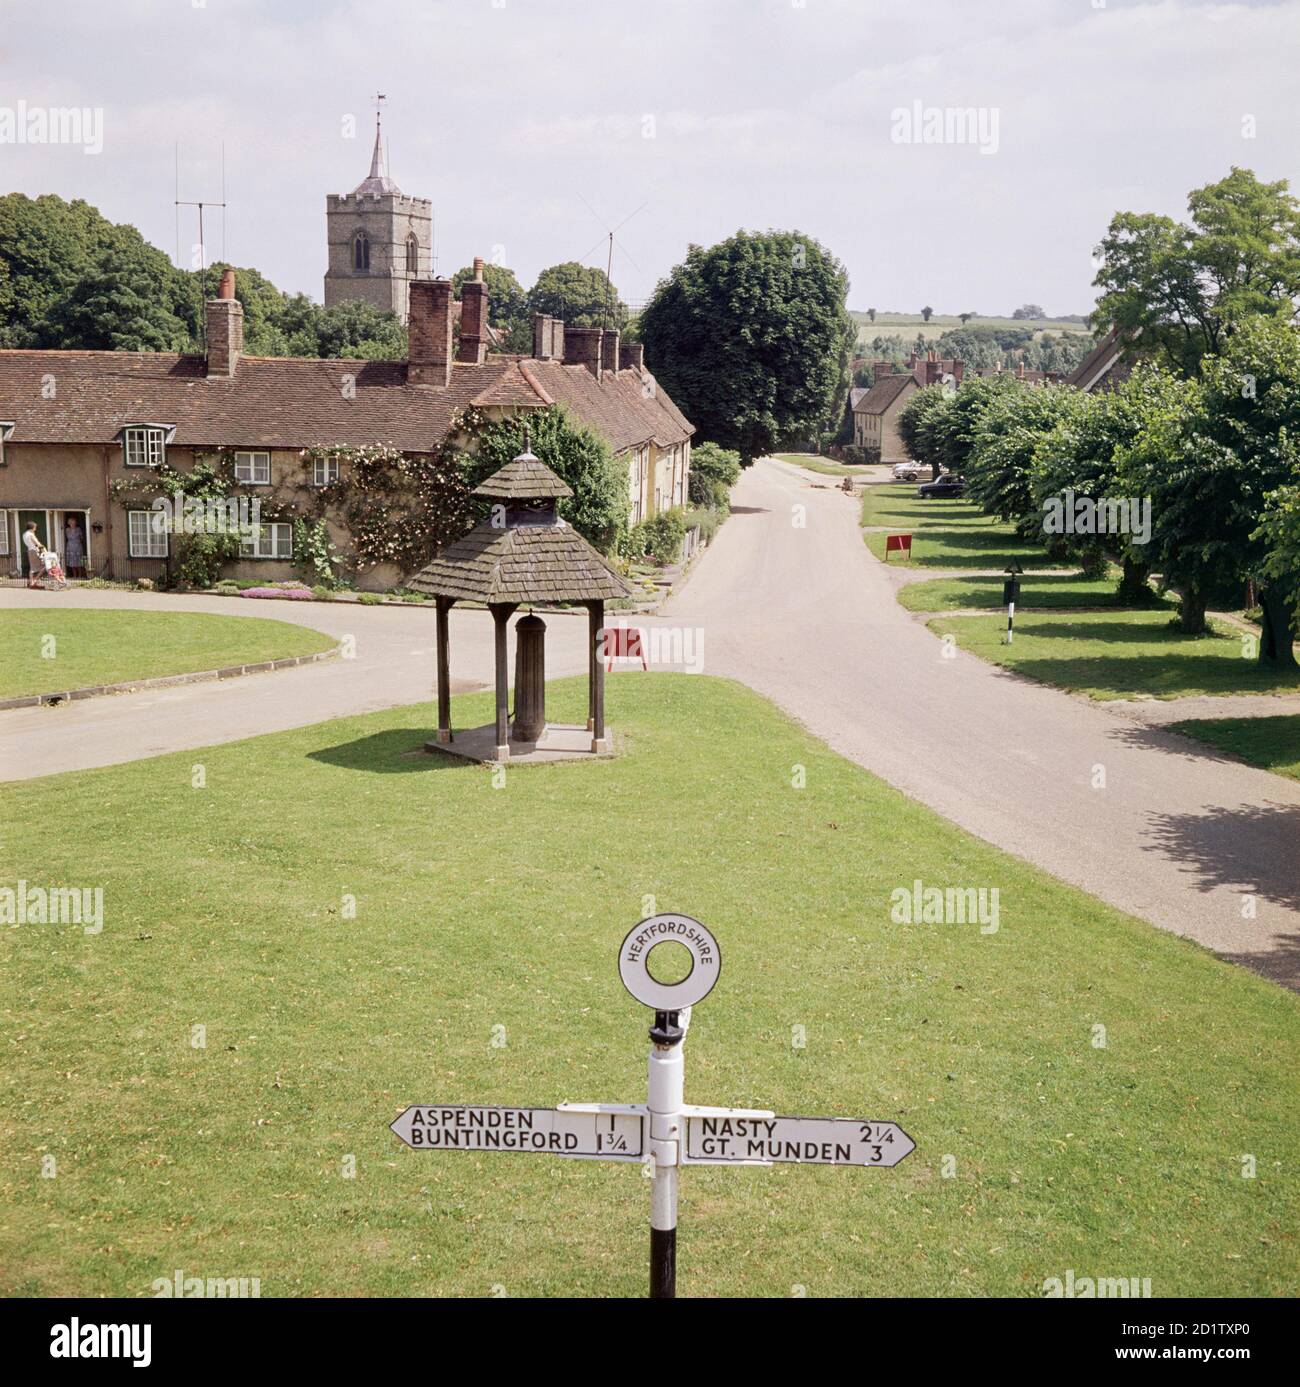 WESTMILL, Hertfordshire. View of the village green and roofed village pump in Westmill. In the background, houses on Pilgrims Close with the tower of St Mary's Church beyond. In the foreground is the top half of a Hertfordshire finger post including the placename Nasty.  Photographed by John Gay in 1973. Stock Photo